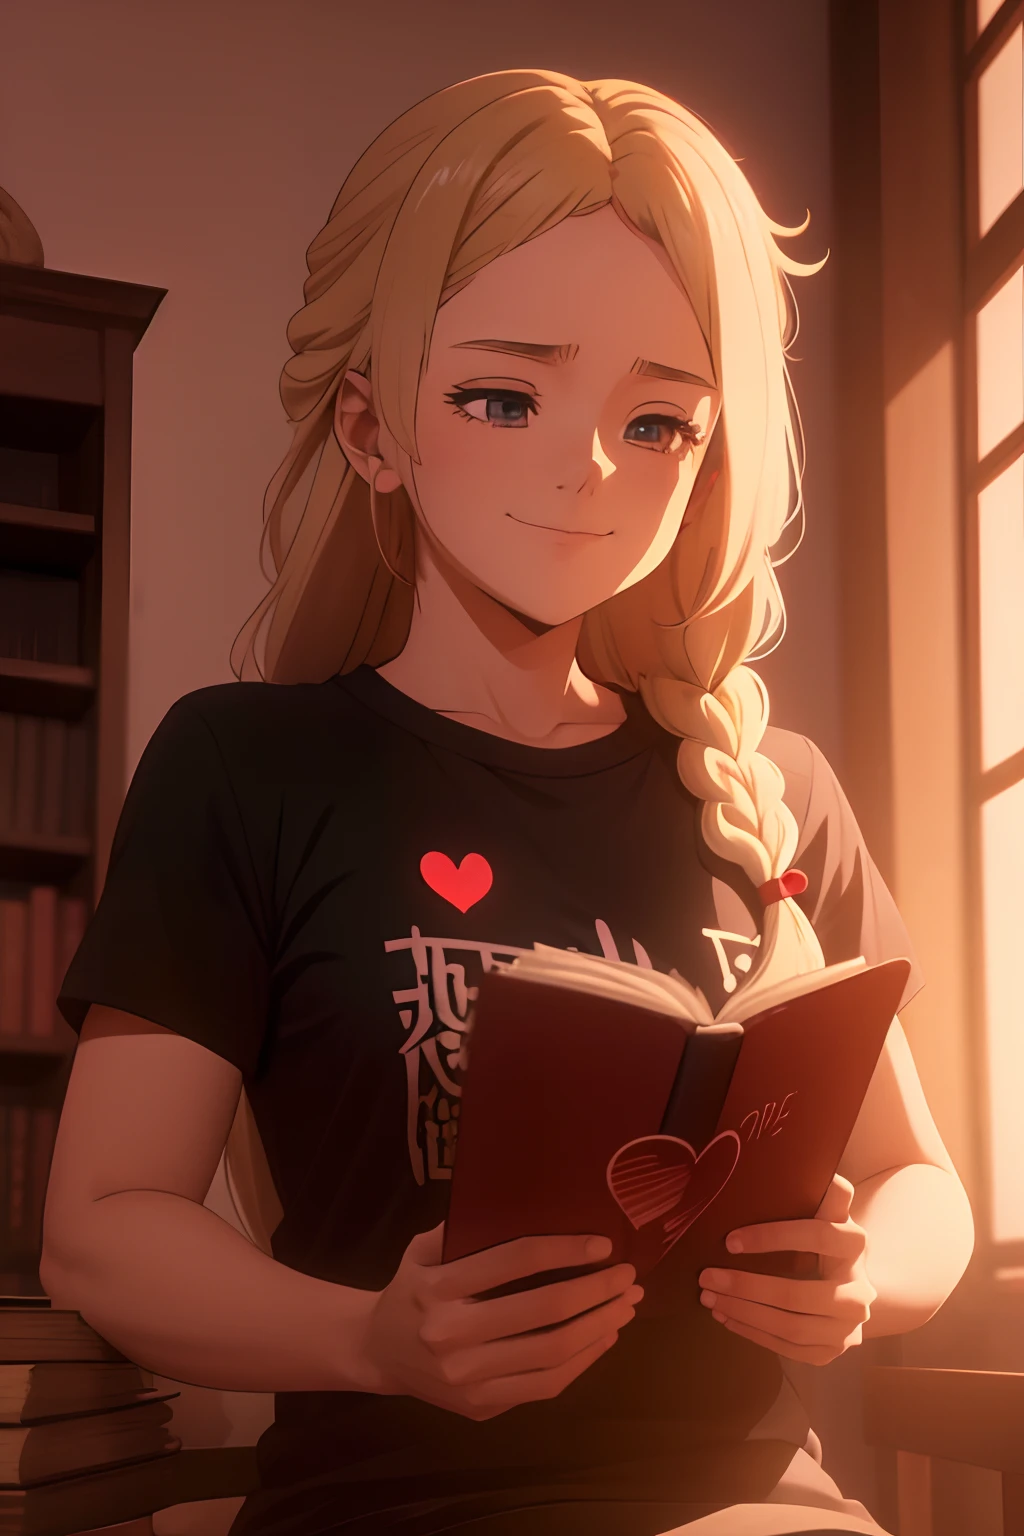 girl with blonde hair with a long braid in her hair, wearing a black t-shirt with small red hearts printed on the black t-shirt, she is reading a book, happy expression, inside the room, bright colors, sunny day, Japanese anime style